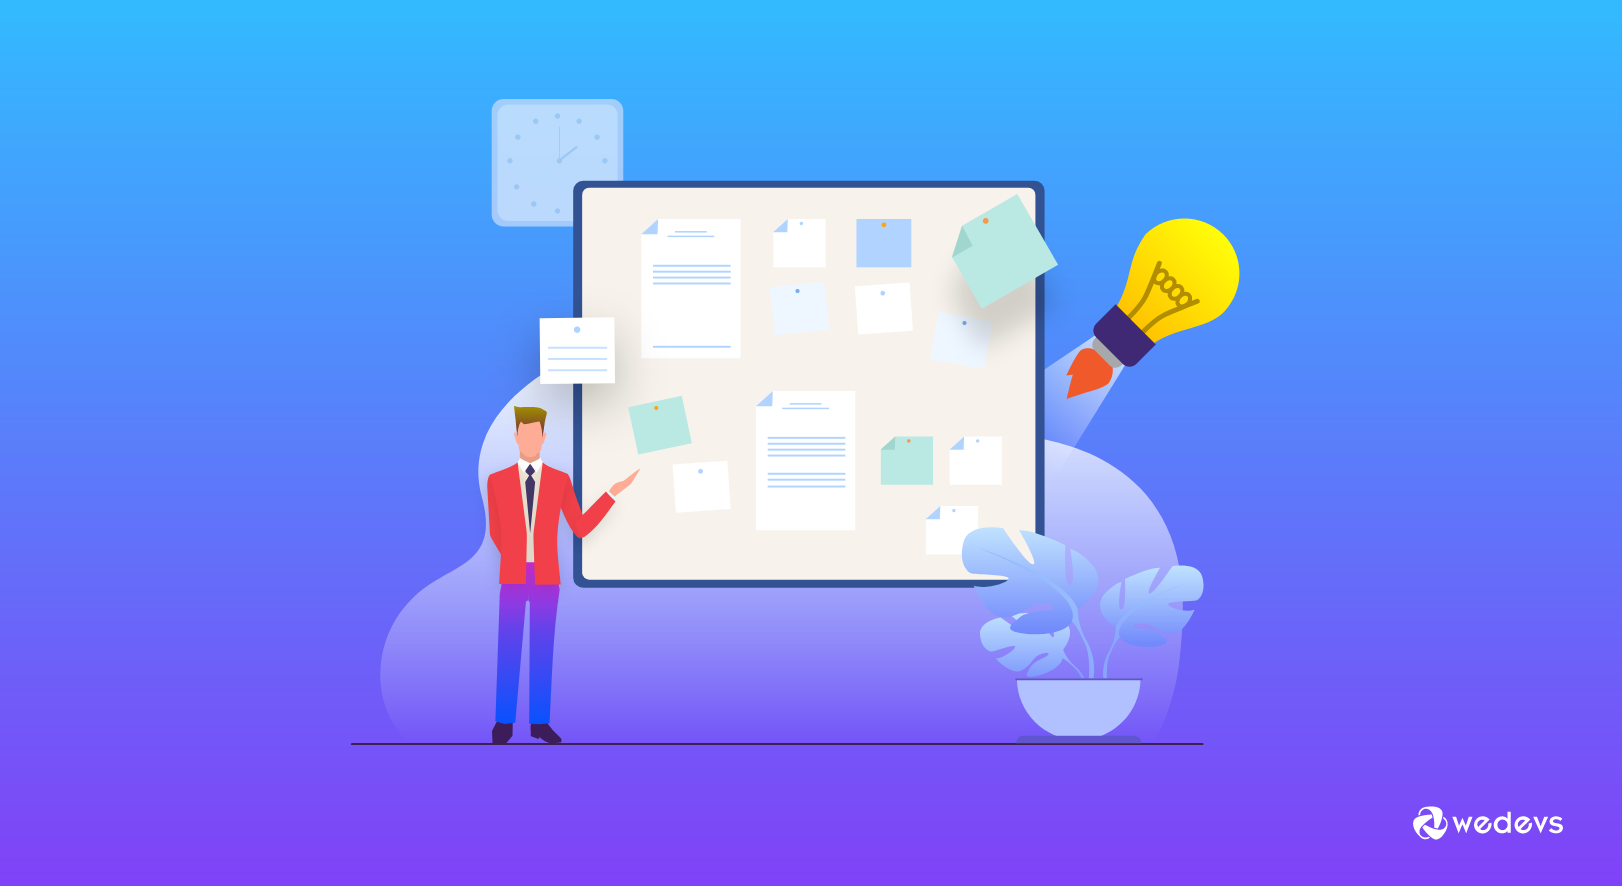 How WP Project Manager is Planning to Make Your Tasks & Team Management Better in 2020